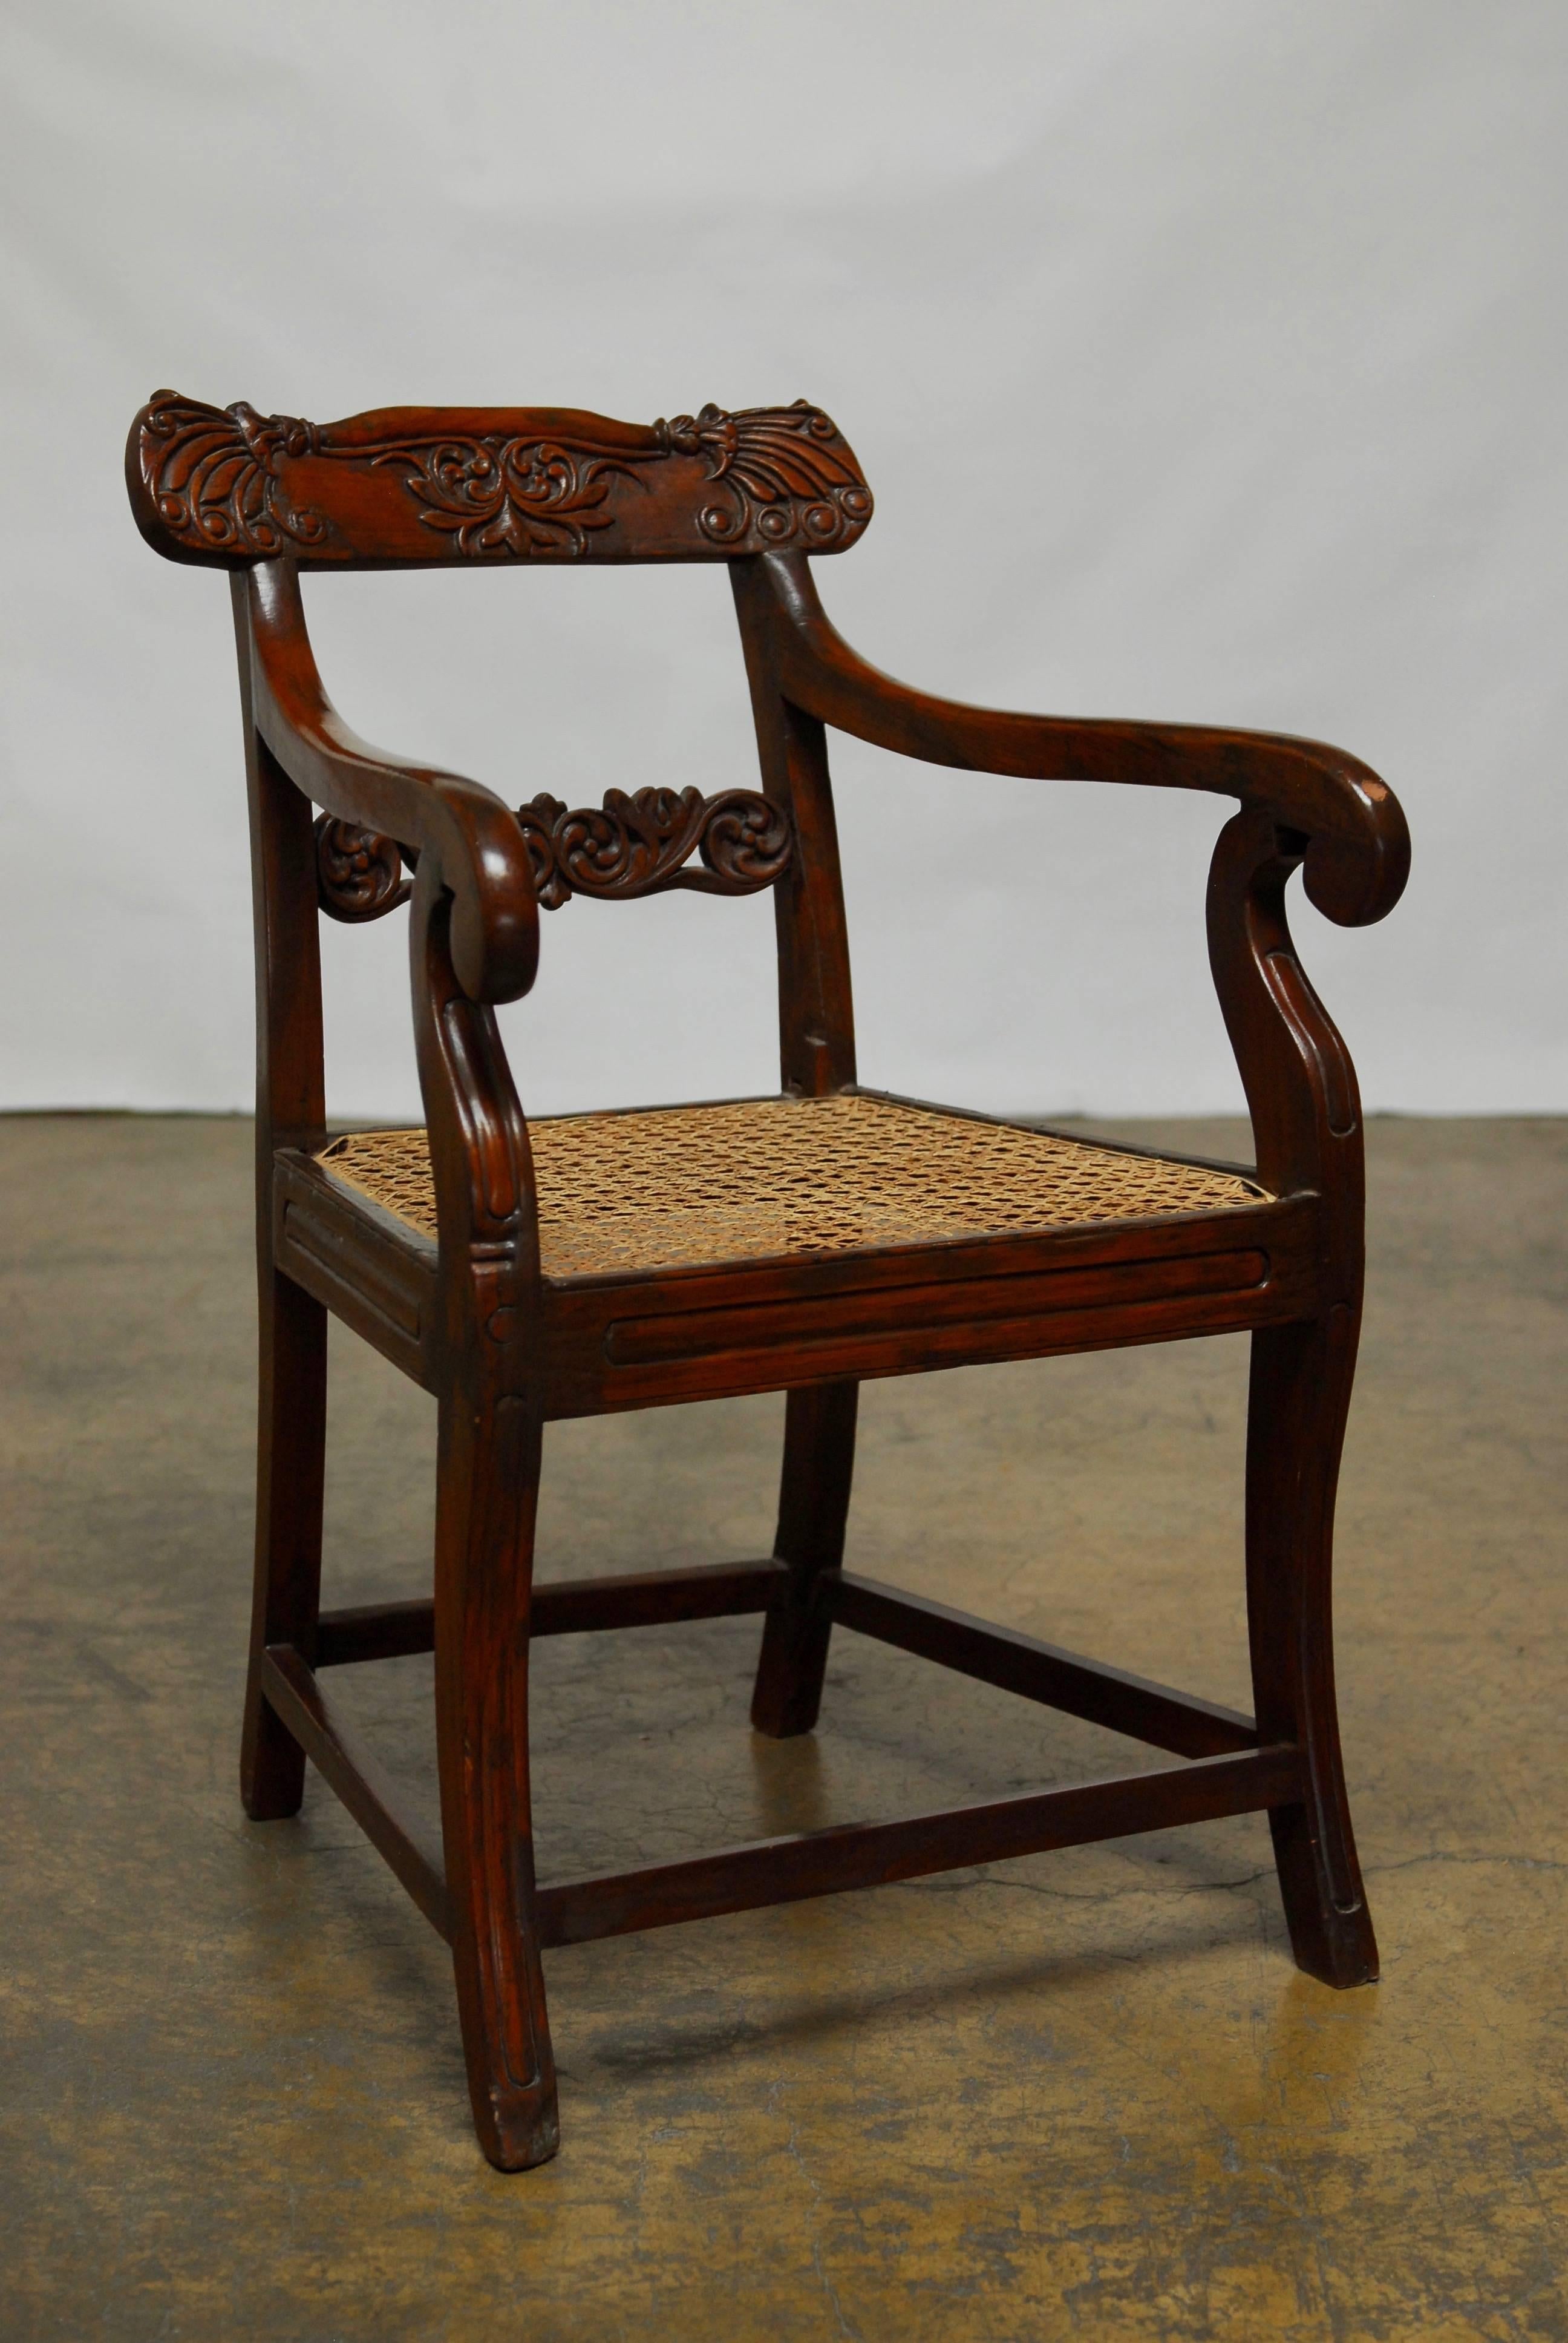 Unique carved rosewood armchair made in the Anglo-Indian or British Colonial taste. Featuring long scrolled arms and a cane seat. Carved back splat and crest supported by square legs and box stretcher. Chair is in very good condition with tight